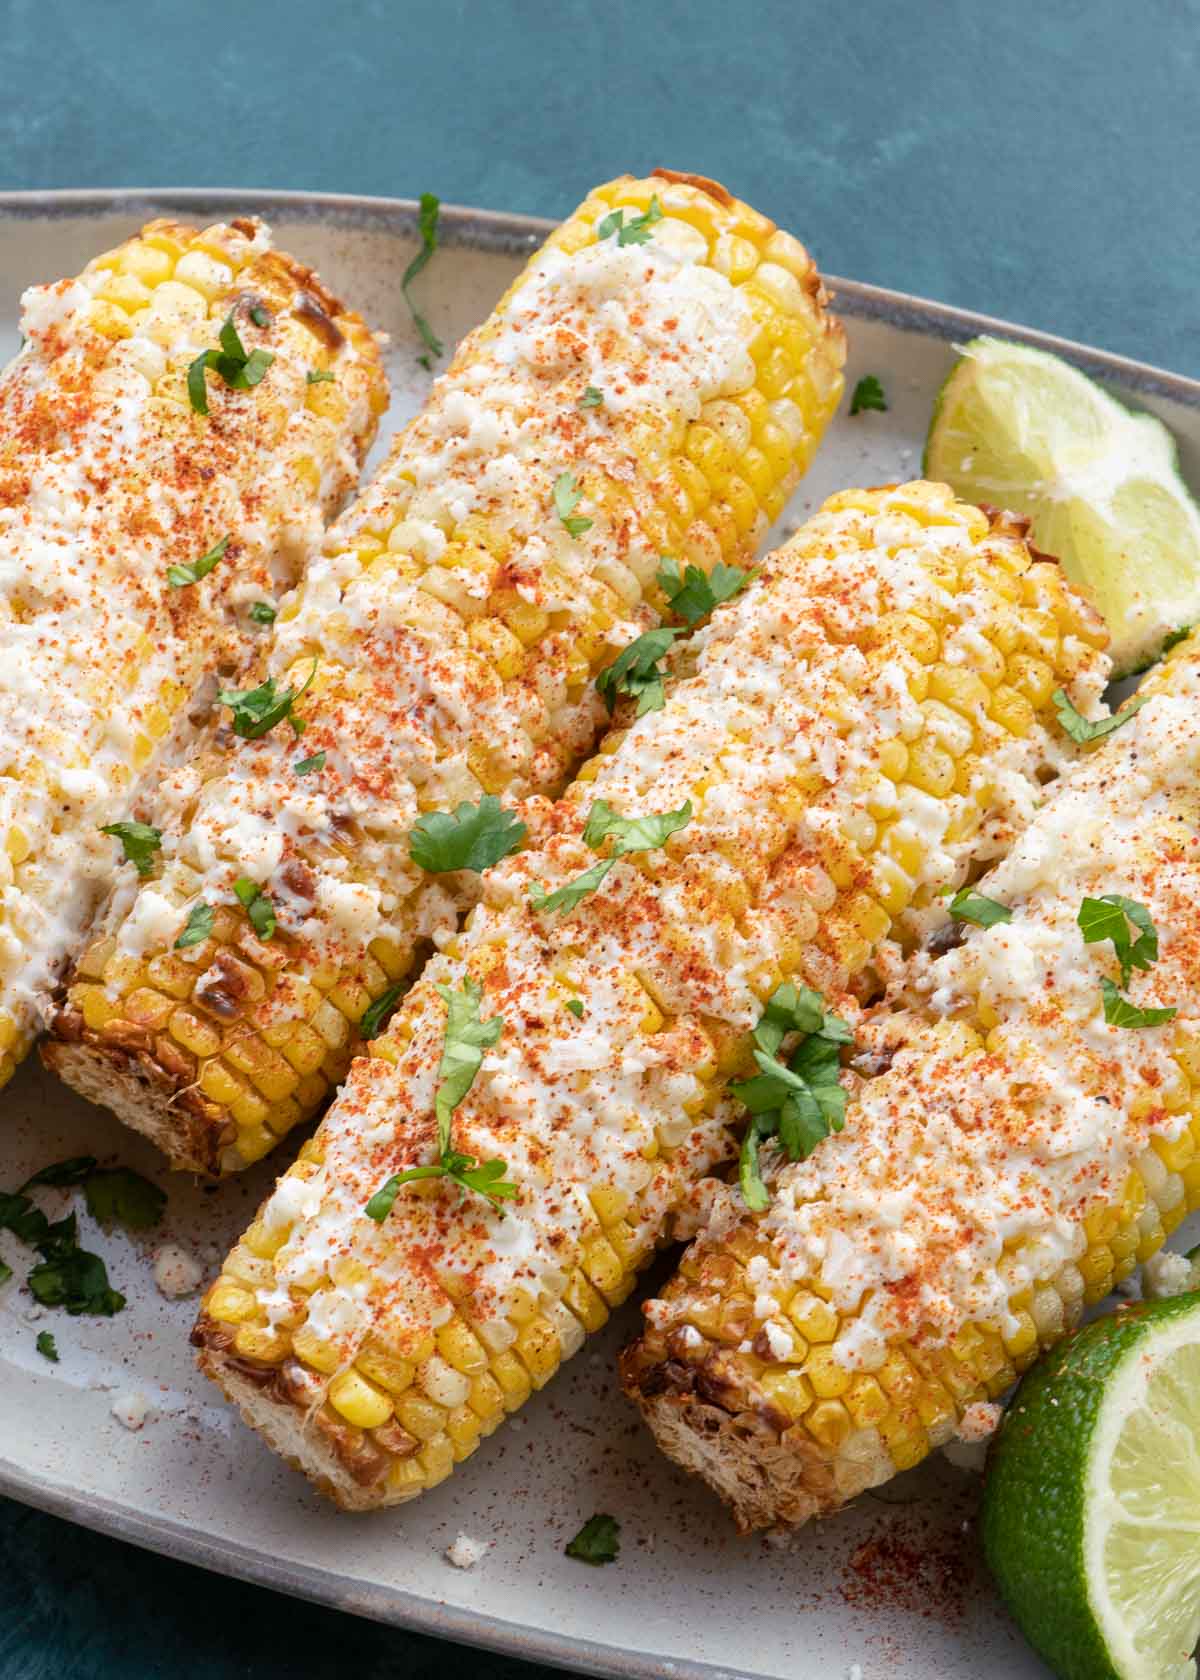 Mexican Street Corn is the ultimate side dish, it is sweet, salty and savory! Now you can make this easy corn recipe in the air fryer in just 10 minutes!